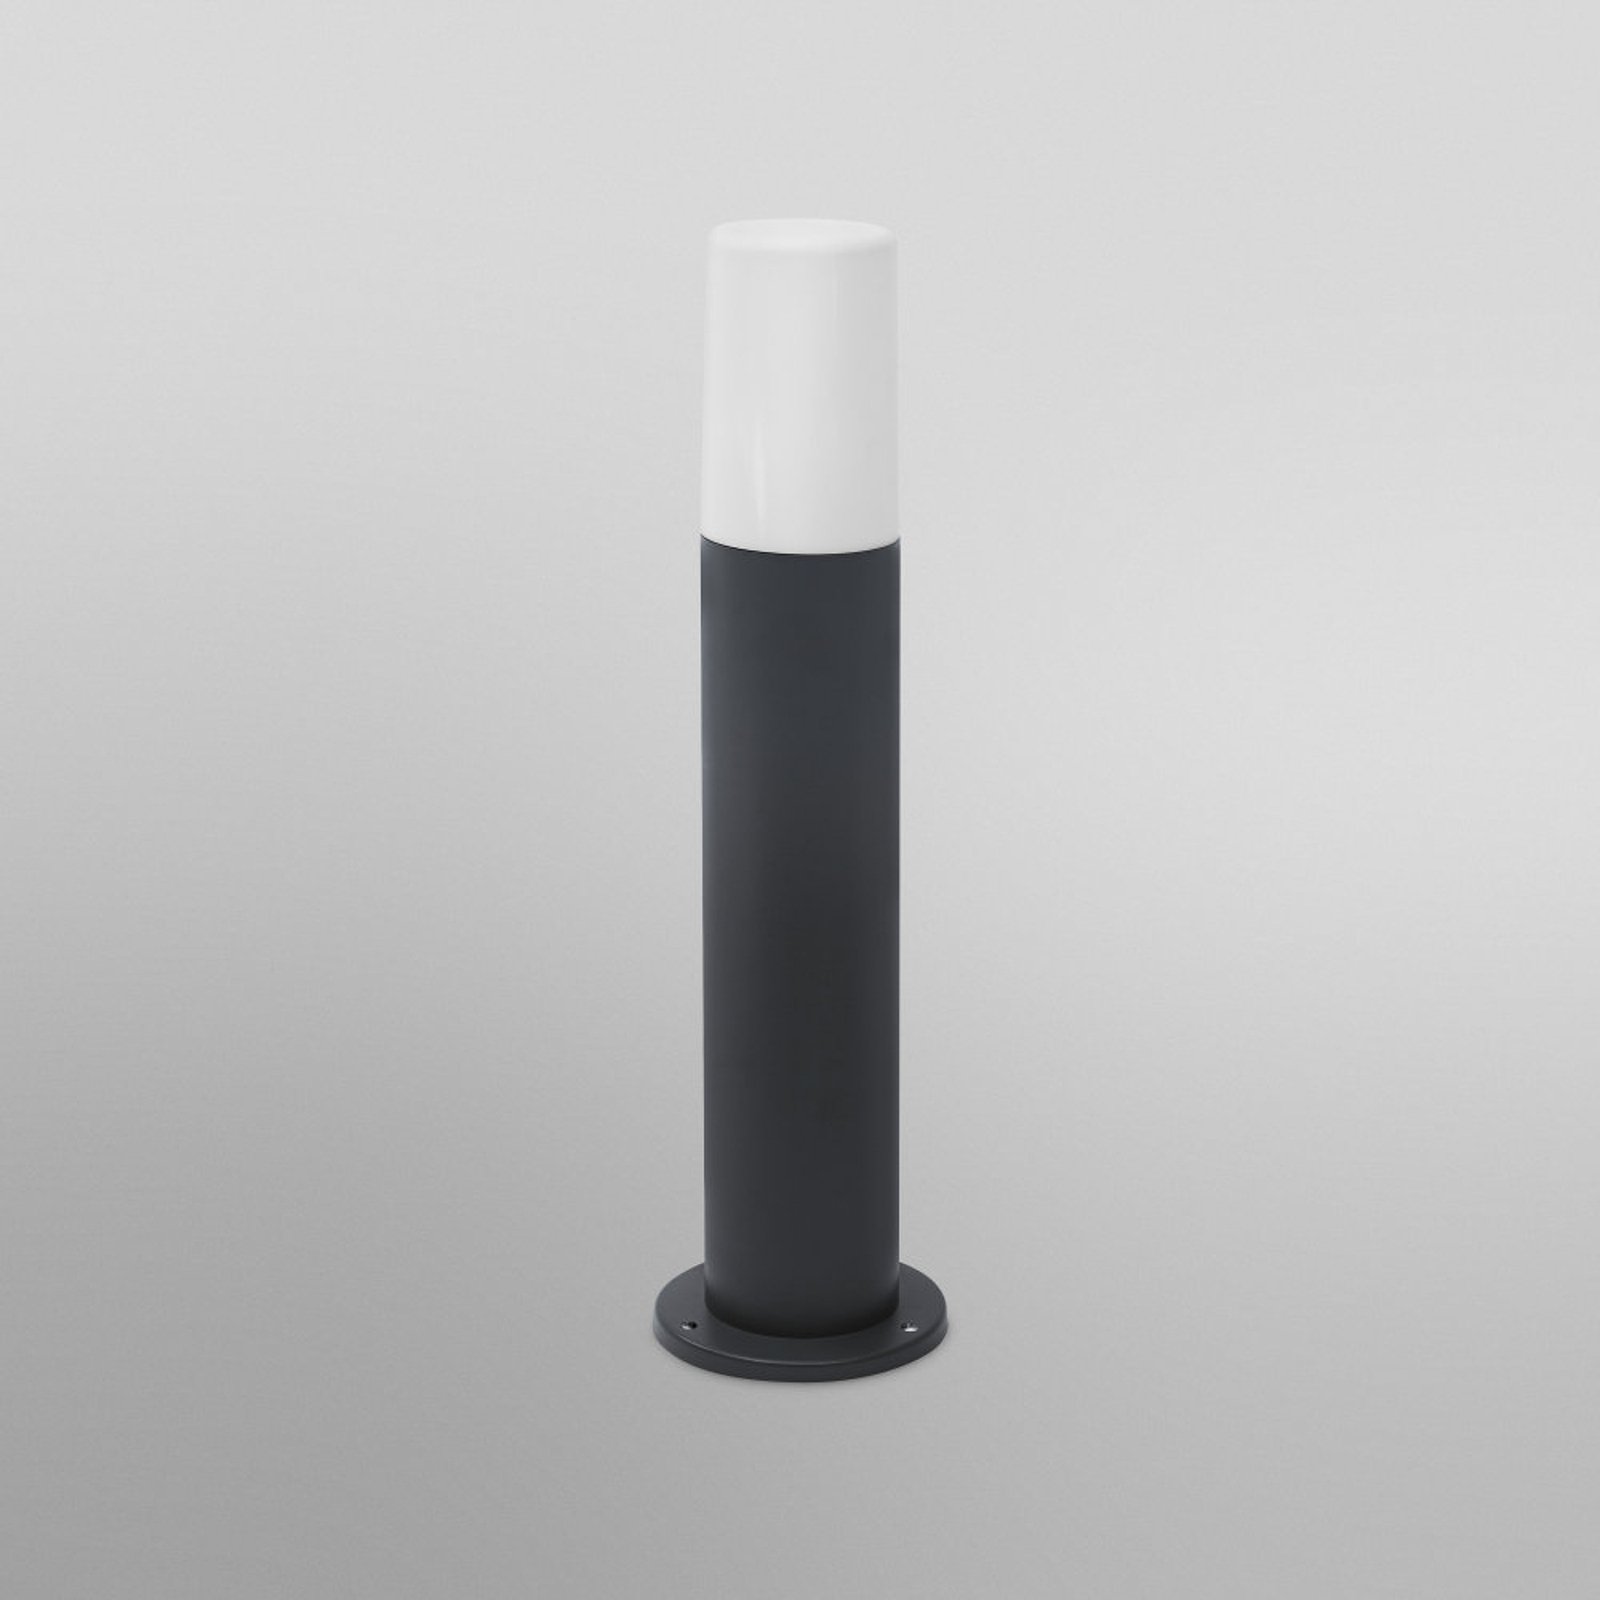 LEDVANCE SMART+ WiFi Outdoor Pipe Post hoogte 50cm